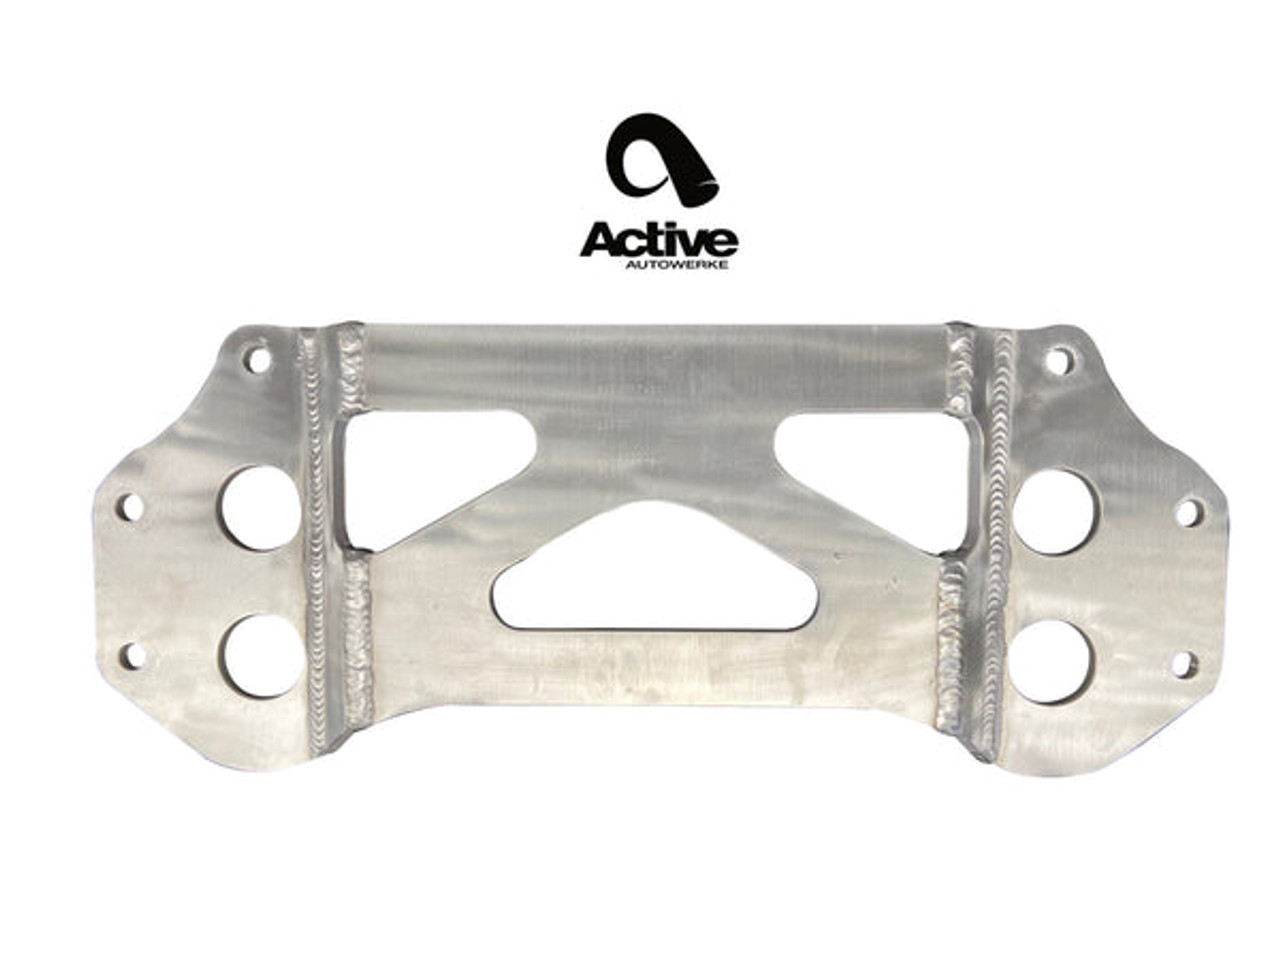 BMW G8X Chassis Brace - Active Autowerke 11-096